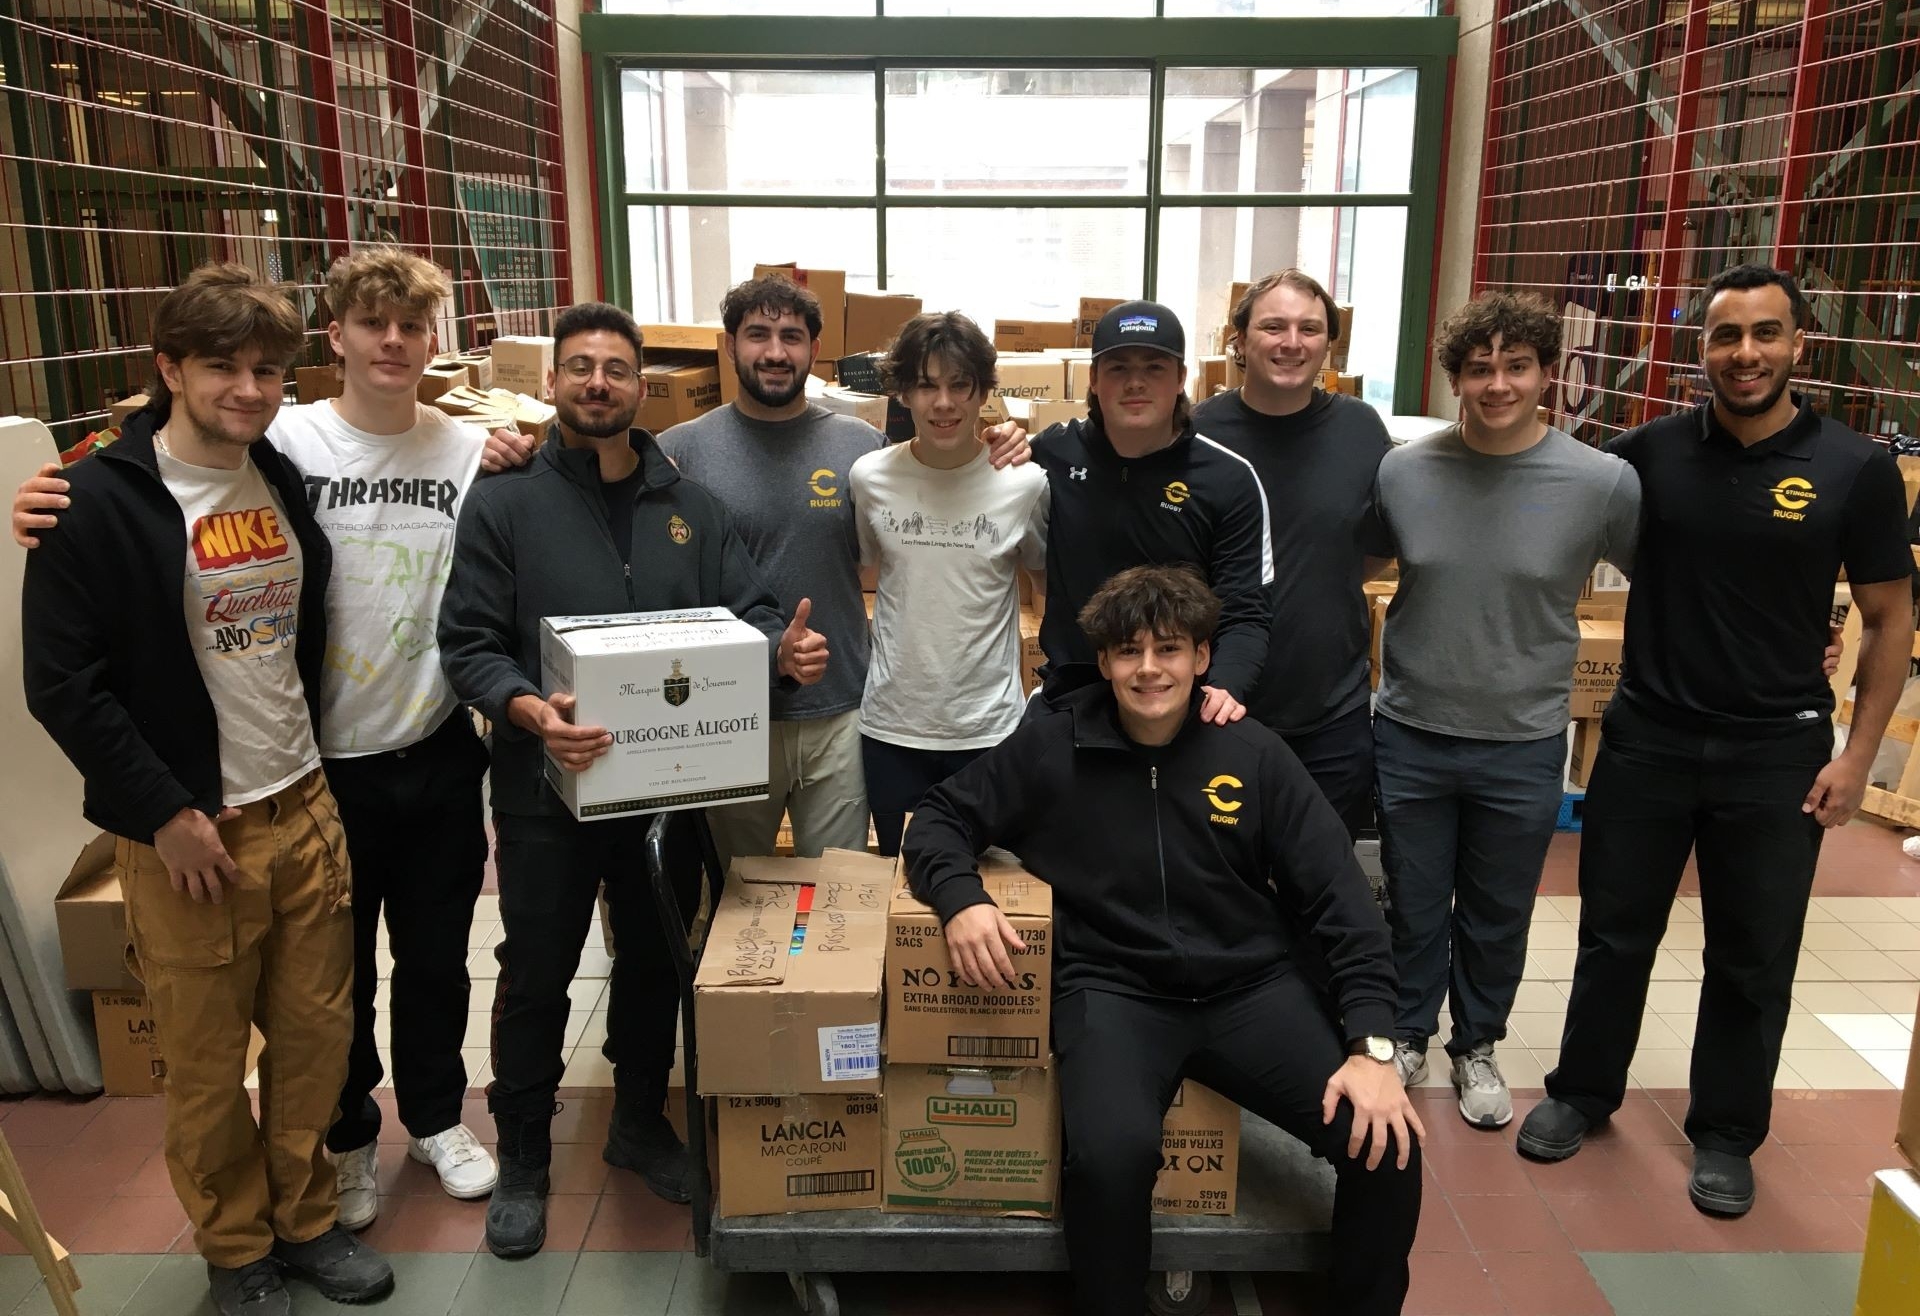 A group of individuals wearing Concordia logo t-shirt's posing with boxes in an indoor setting.